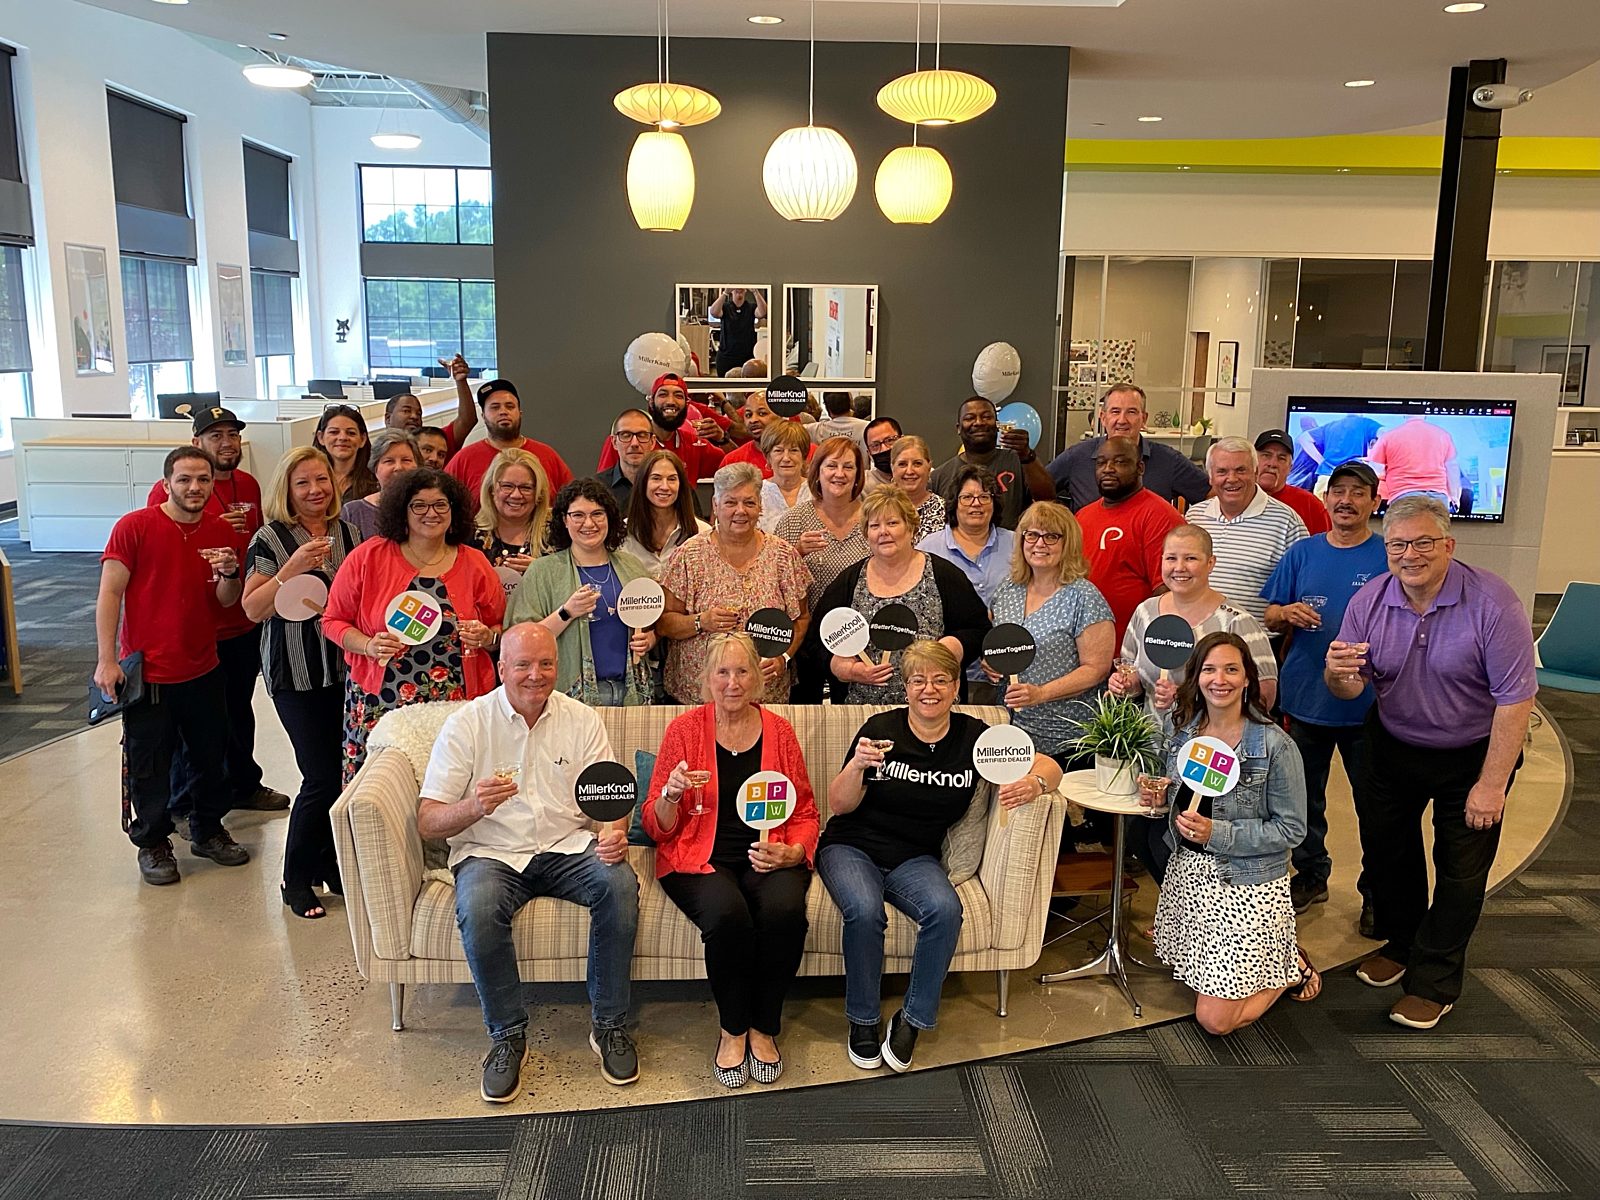 Group shot of our employees holding a glass of champagne and a round paper sign (Best Places to Work, MillerKnoll Certified Dealer, #BetterToghether)